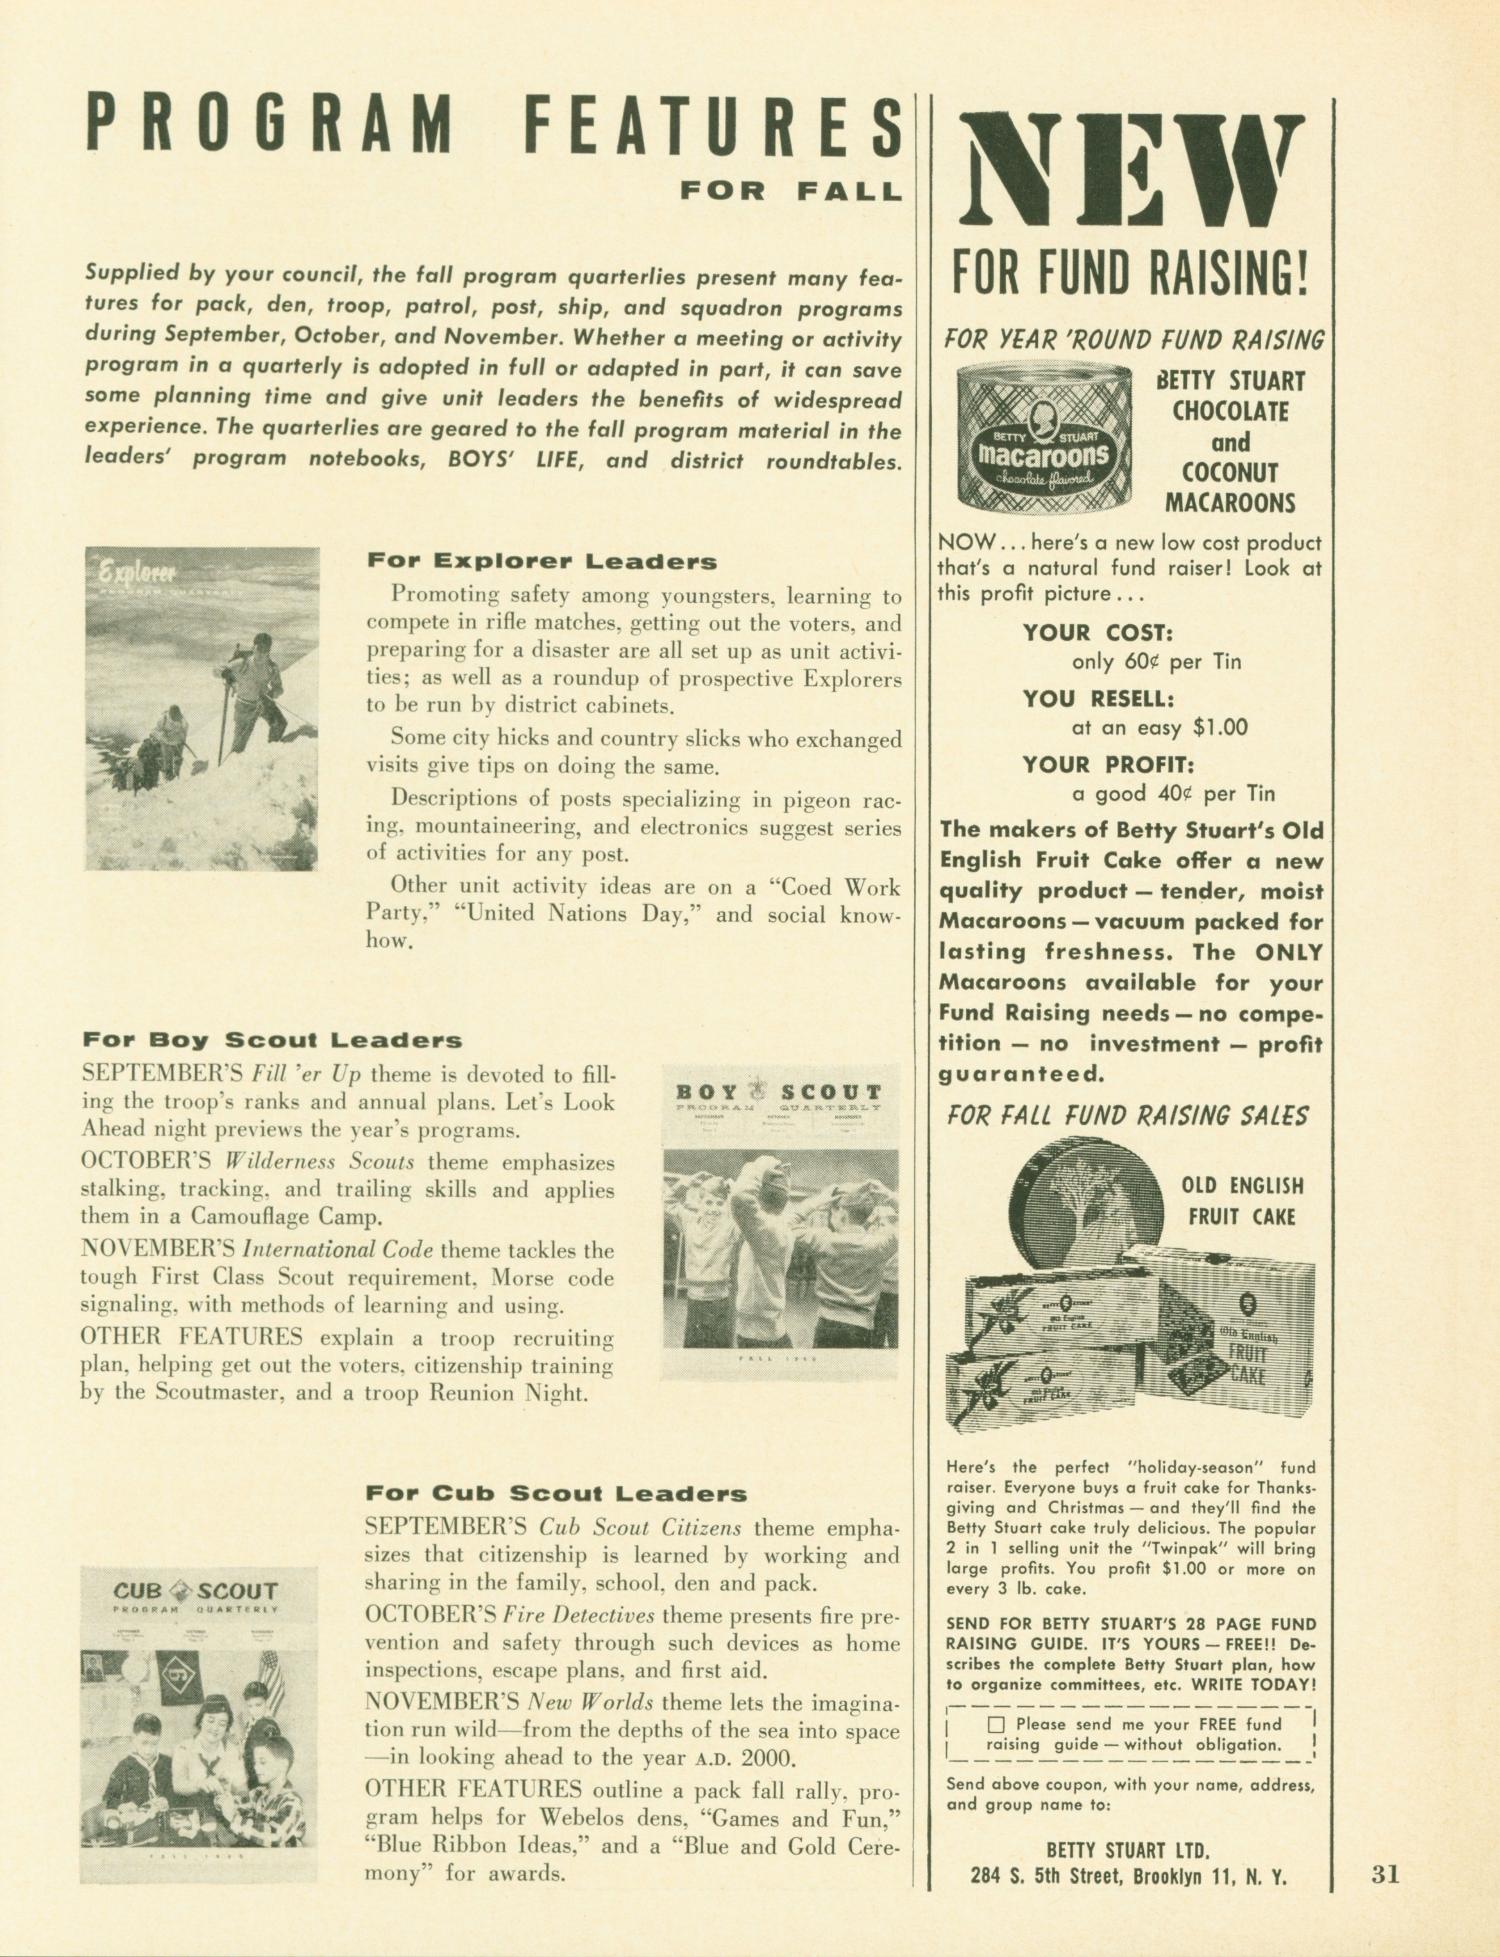 Scouting, Volume 48, Number 6, August-September 1960
                                                
                                                    31
                                                